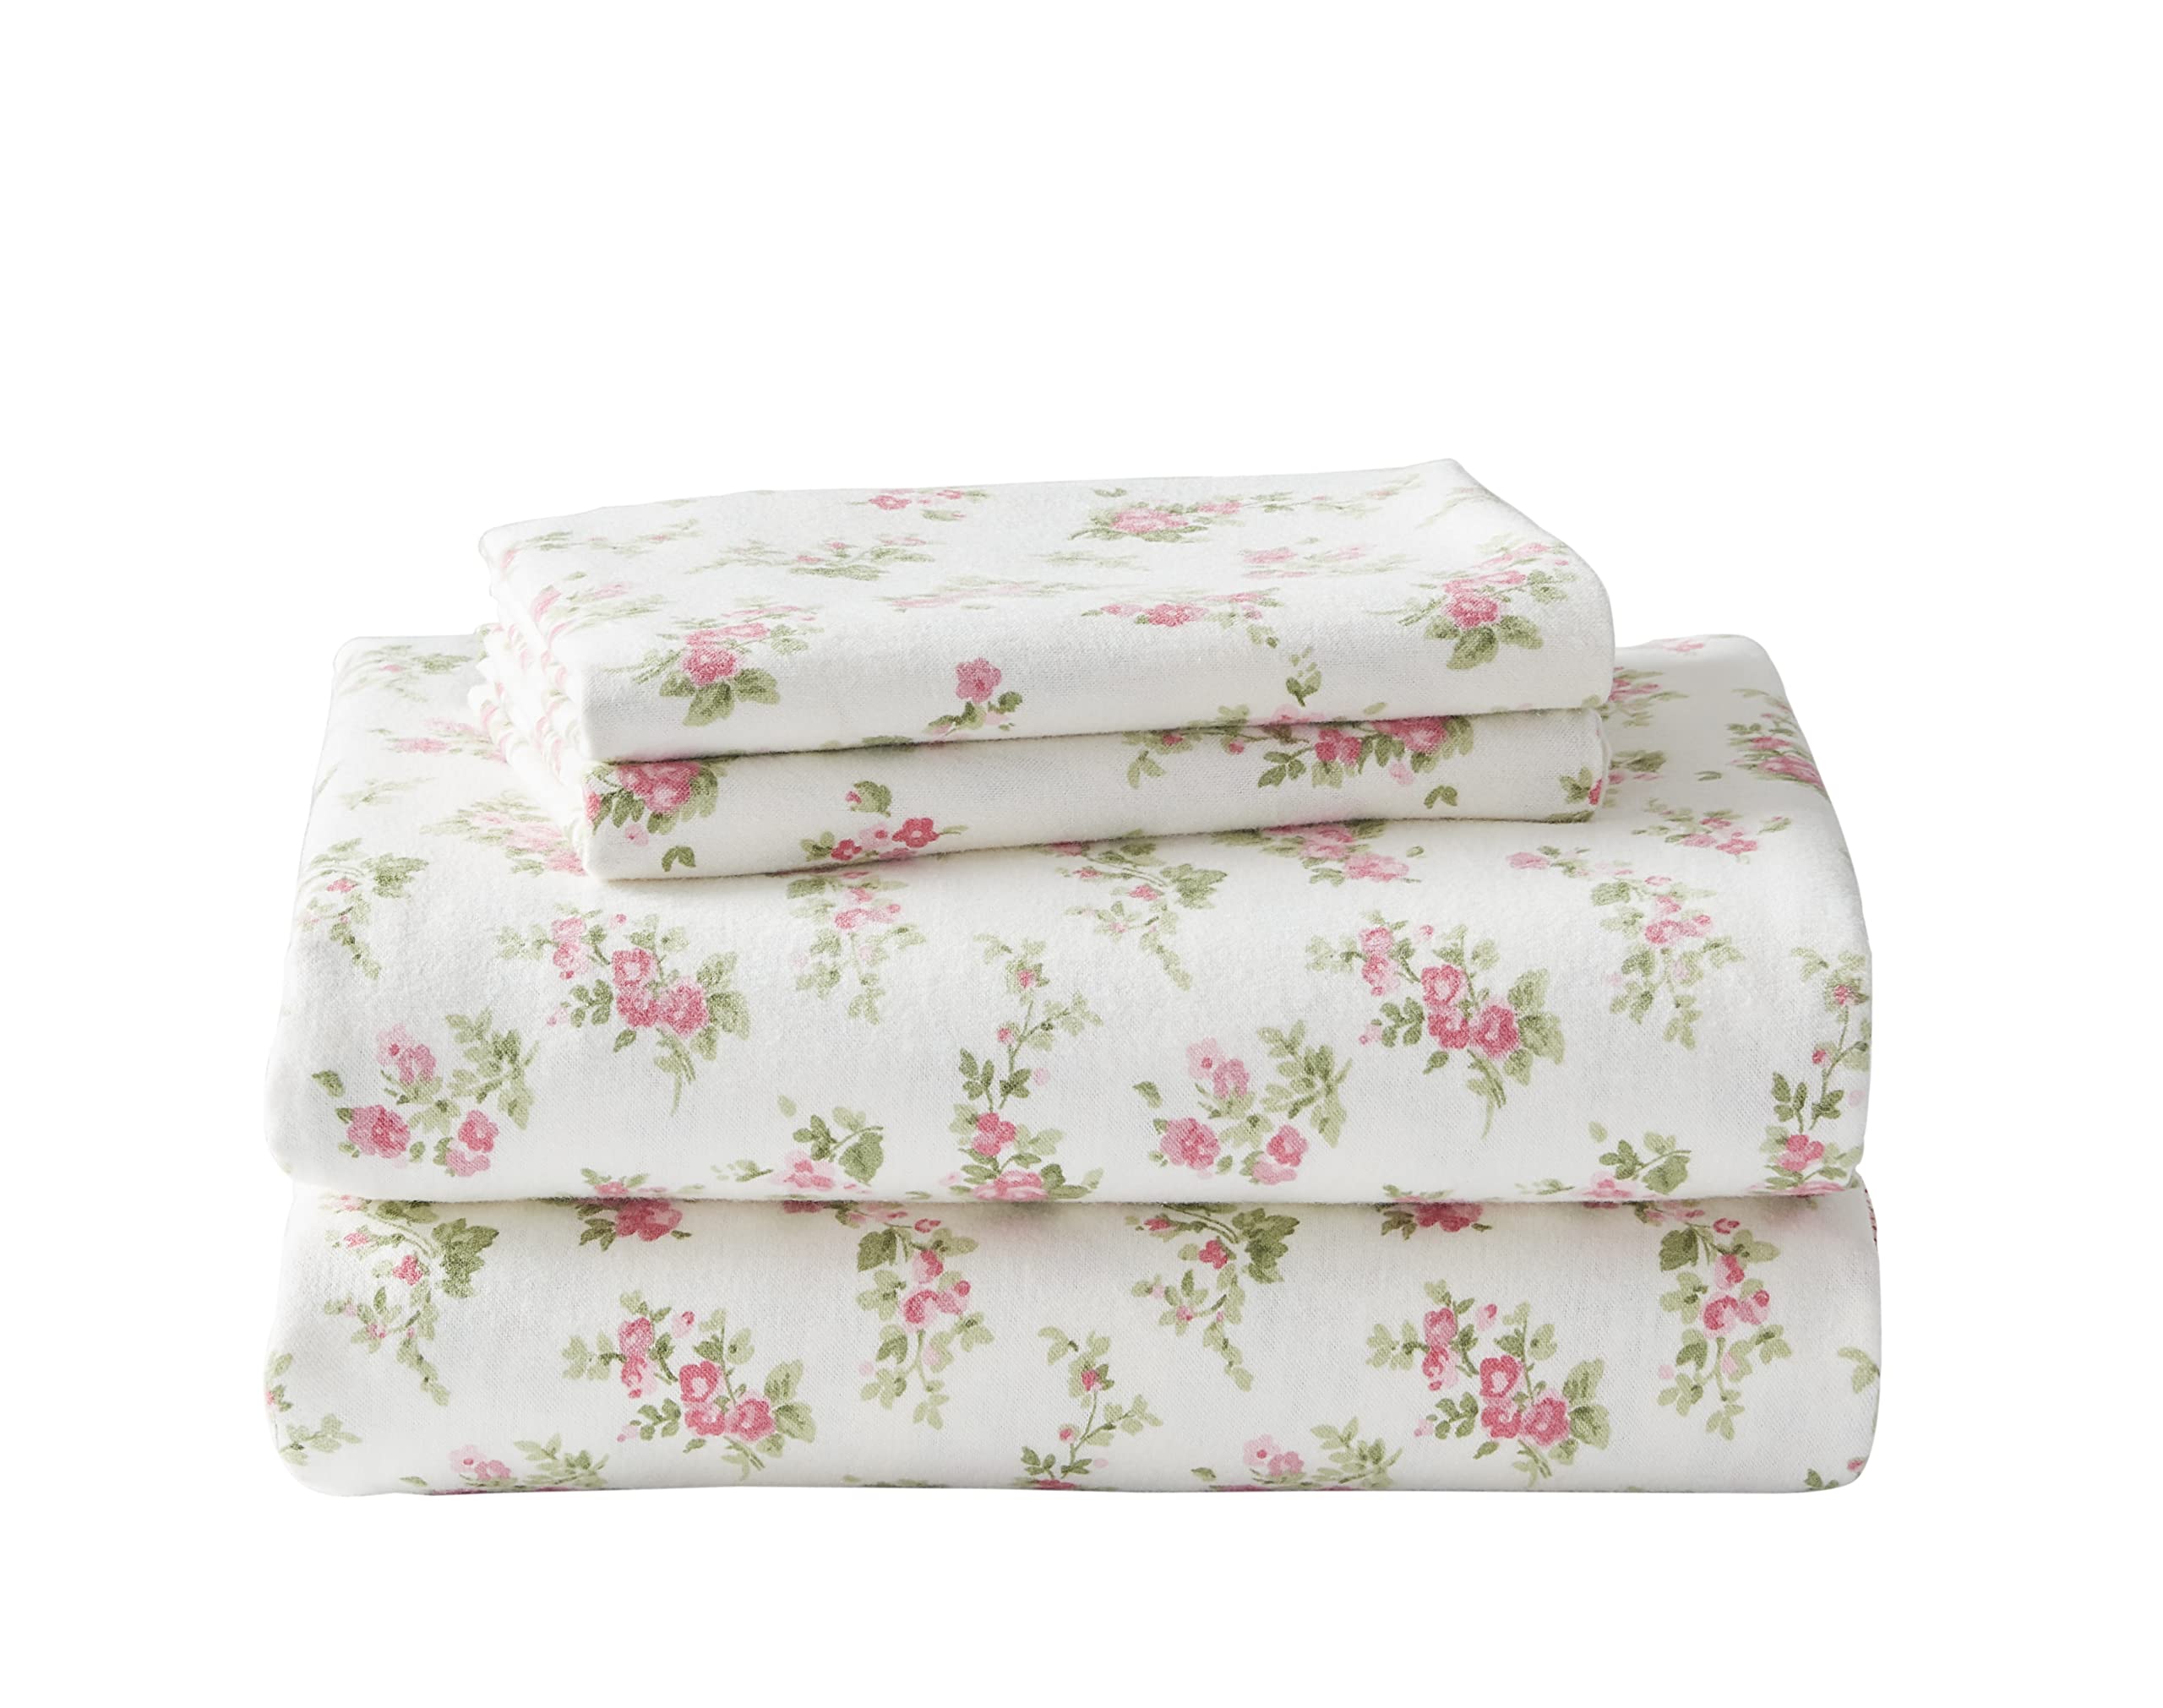 Laura Ashley Home Collection Premium Ultra Soft Cozy Lightweight Cotton Flannel Bedding Sheet Set, Wrinkle, Anti-Fade, Stain Resistant & Hypoallerg...